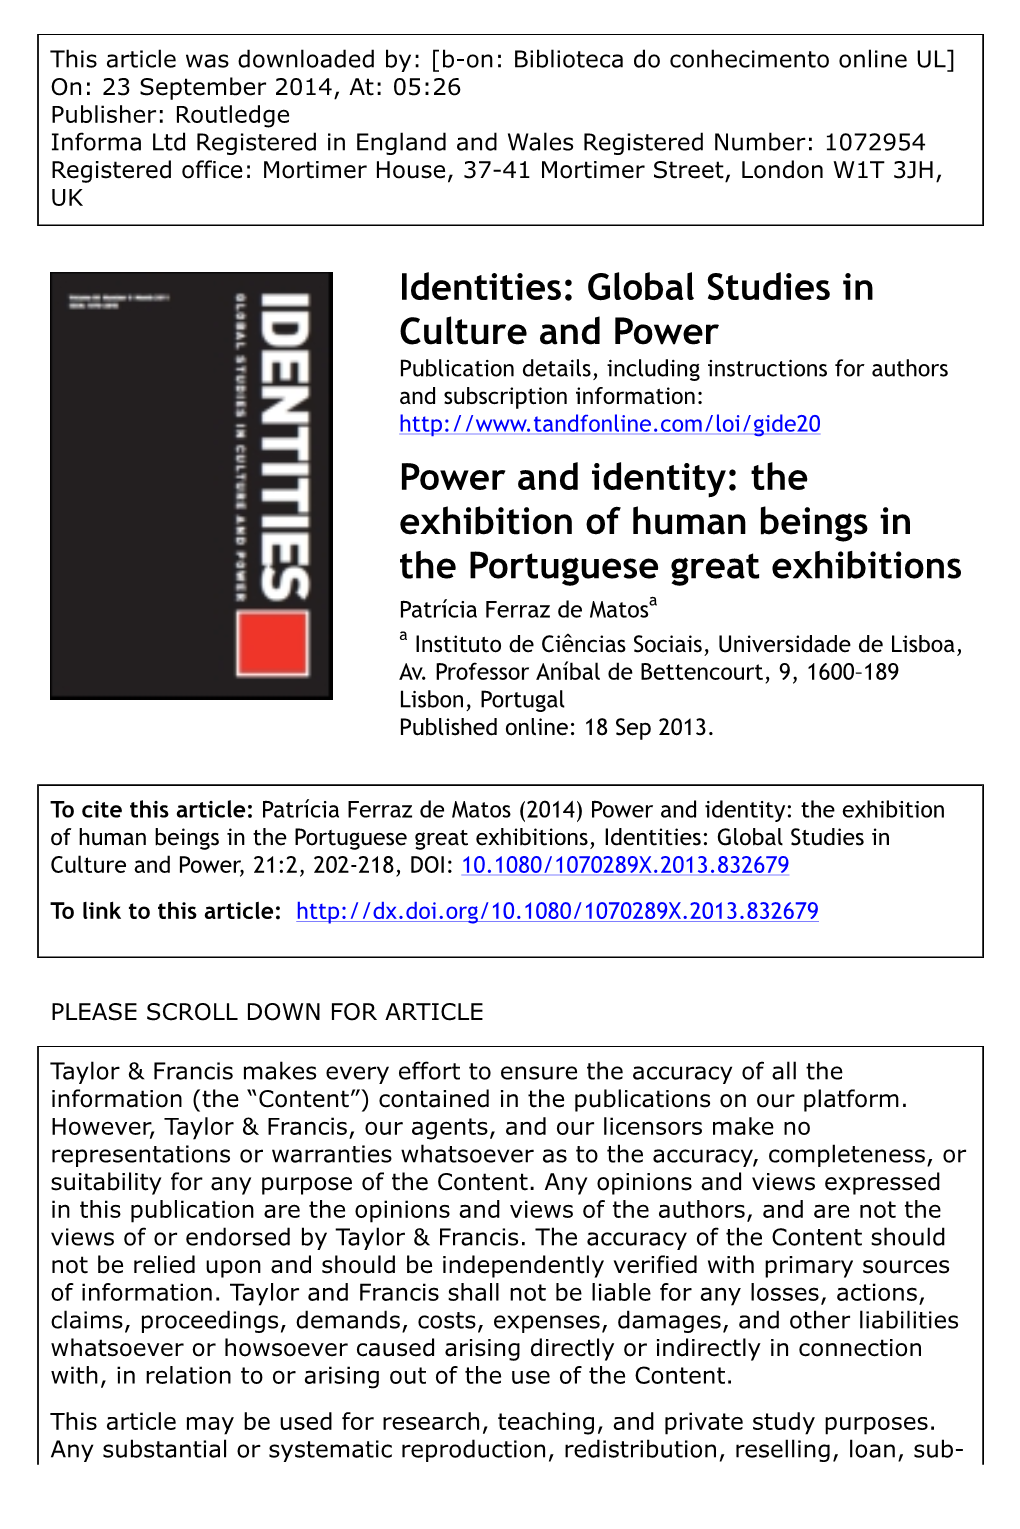 Power and Identity: the Exhibition of Human Beings in the Portuguese